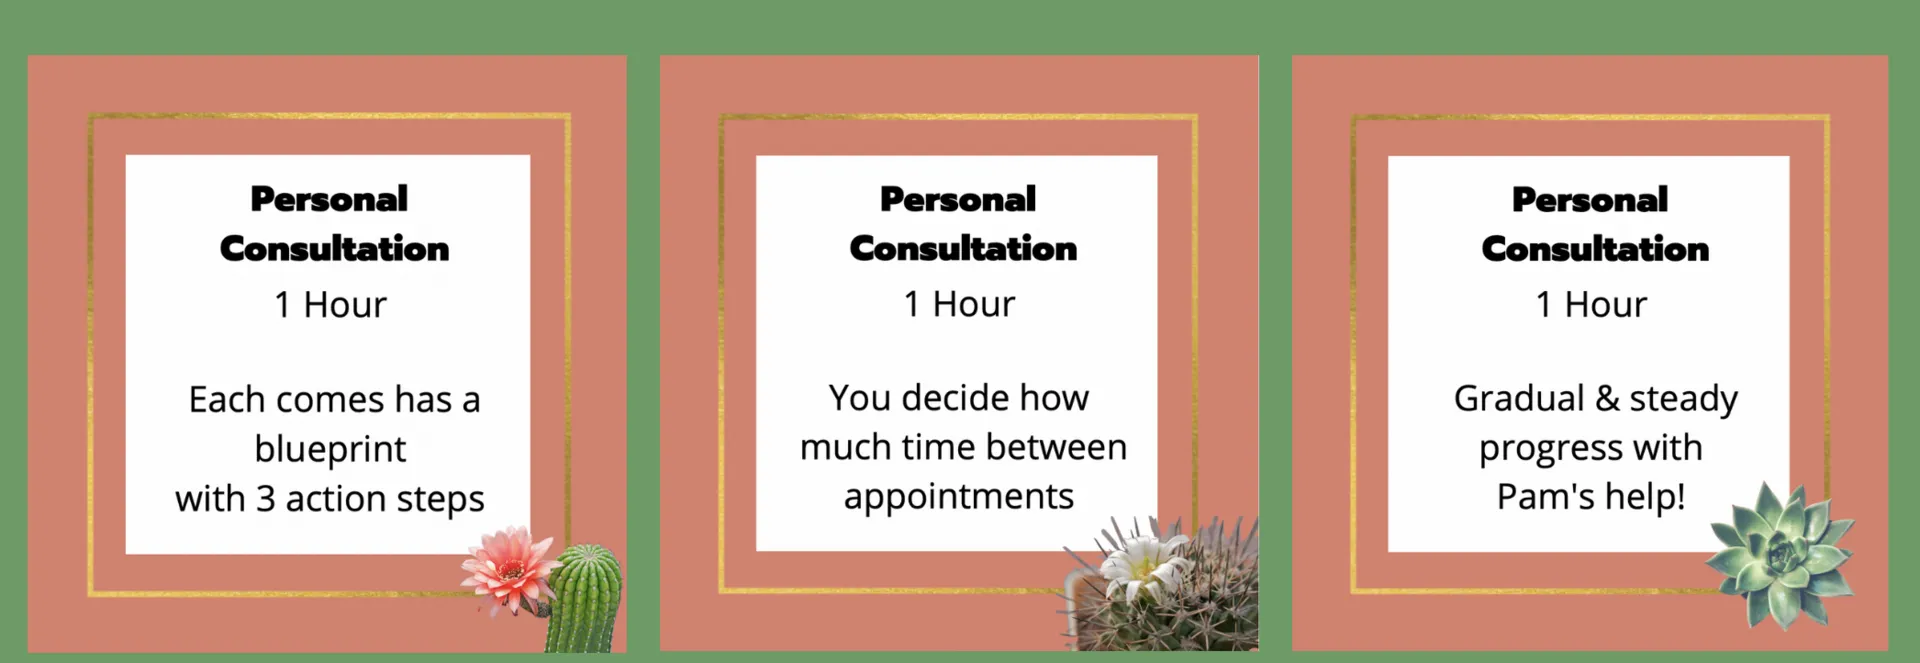 3 Personal Consultations